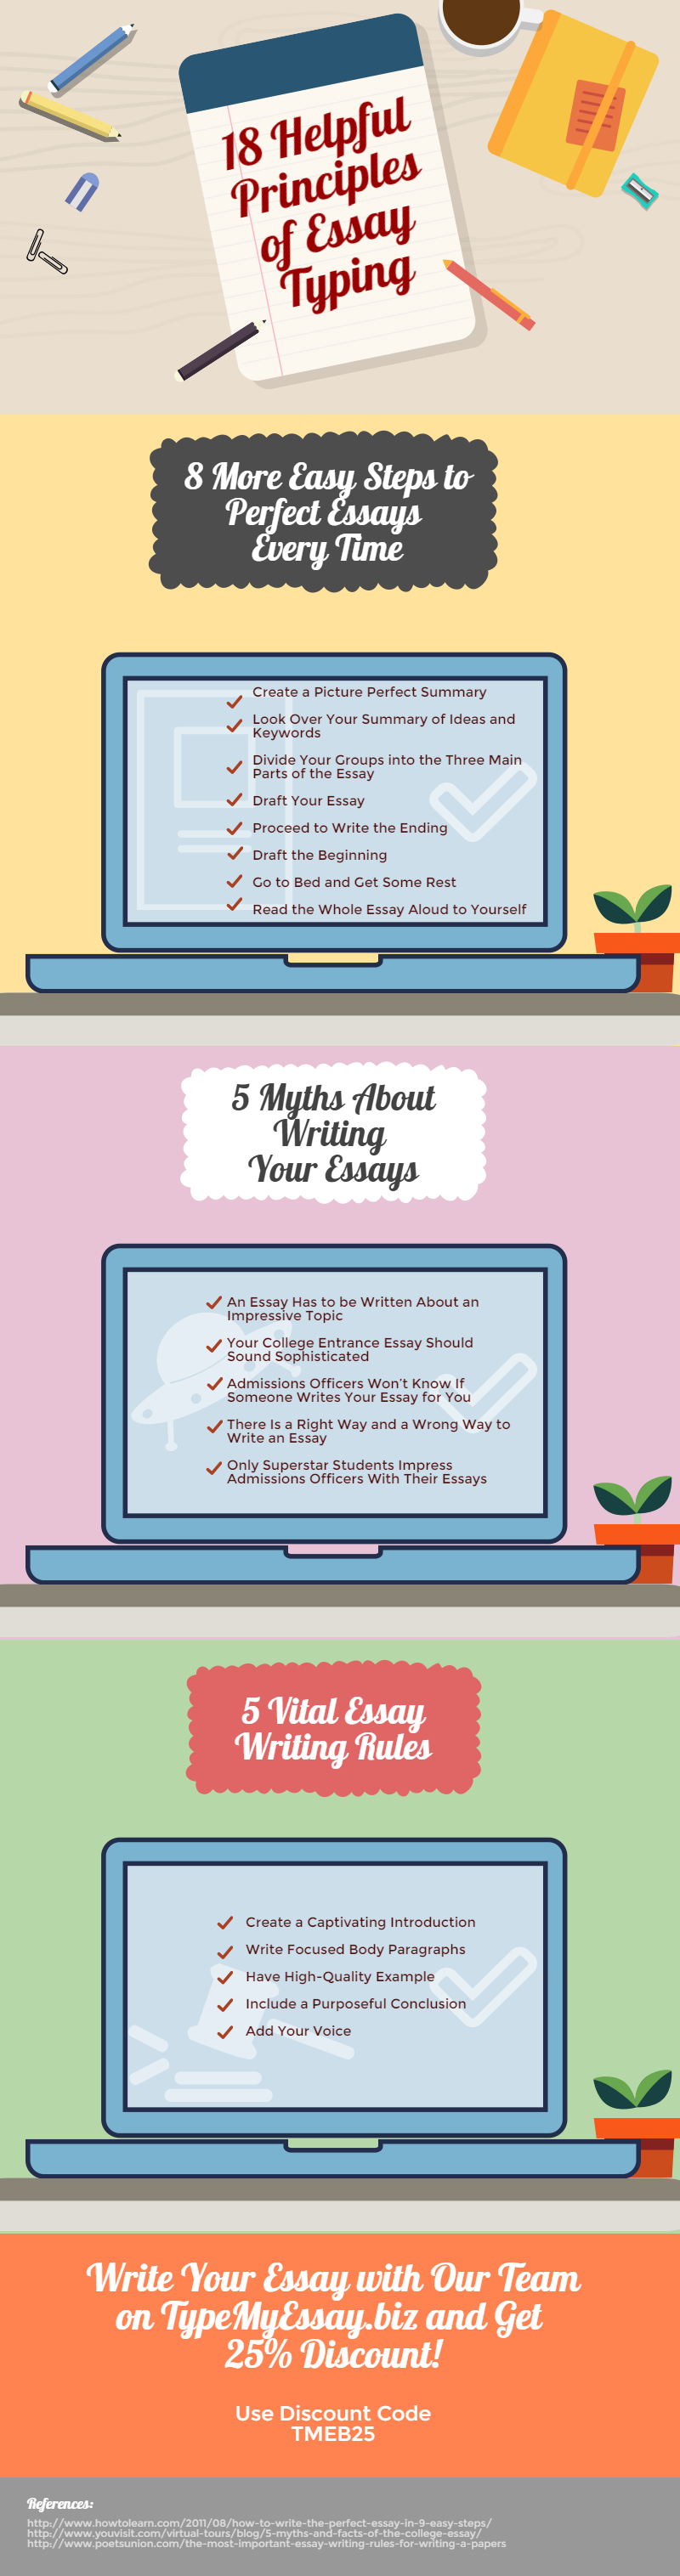 benefits of typing essays